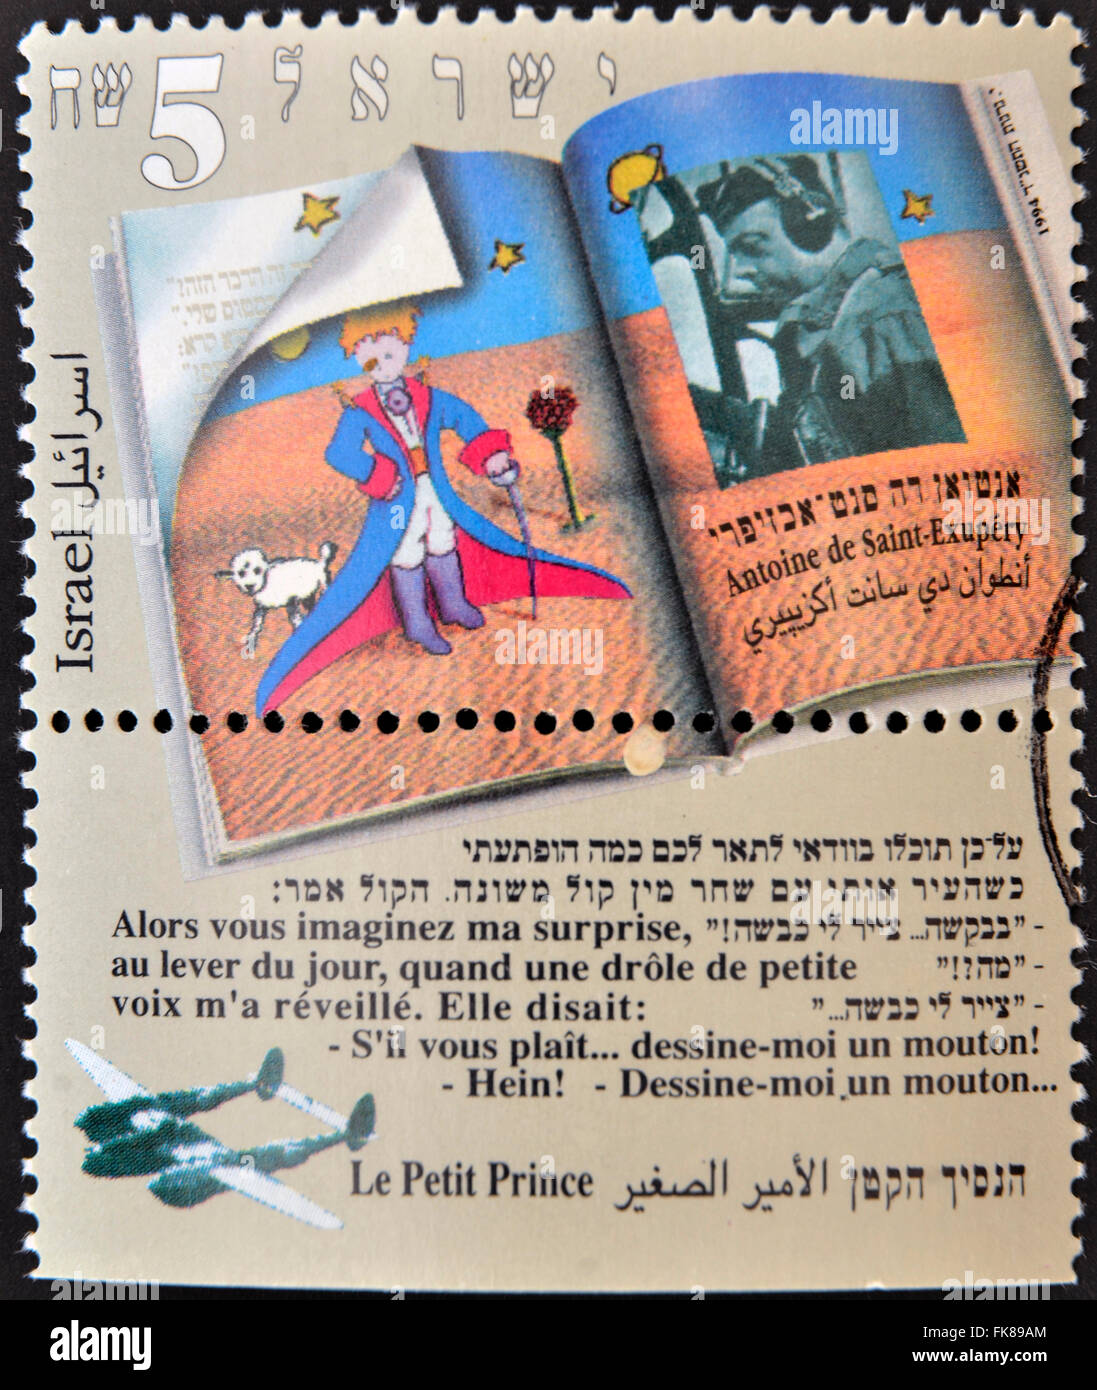 ISRAEL - CIRCA 1994: a postage stamp printed in Israel shows an image of  The Little Prince a novel of Antoine de Saint-Exupery Stock Photo - Alamy